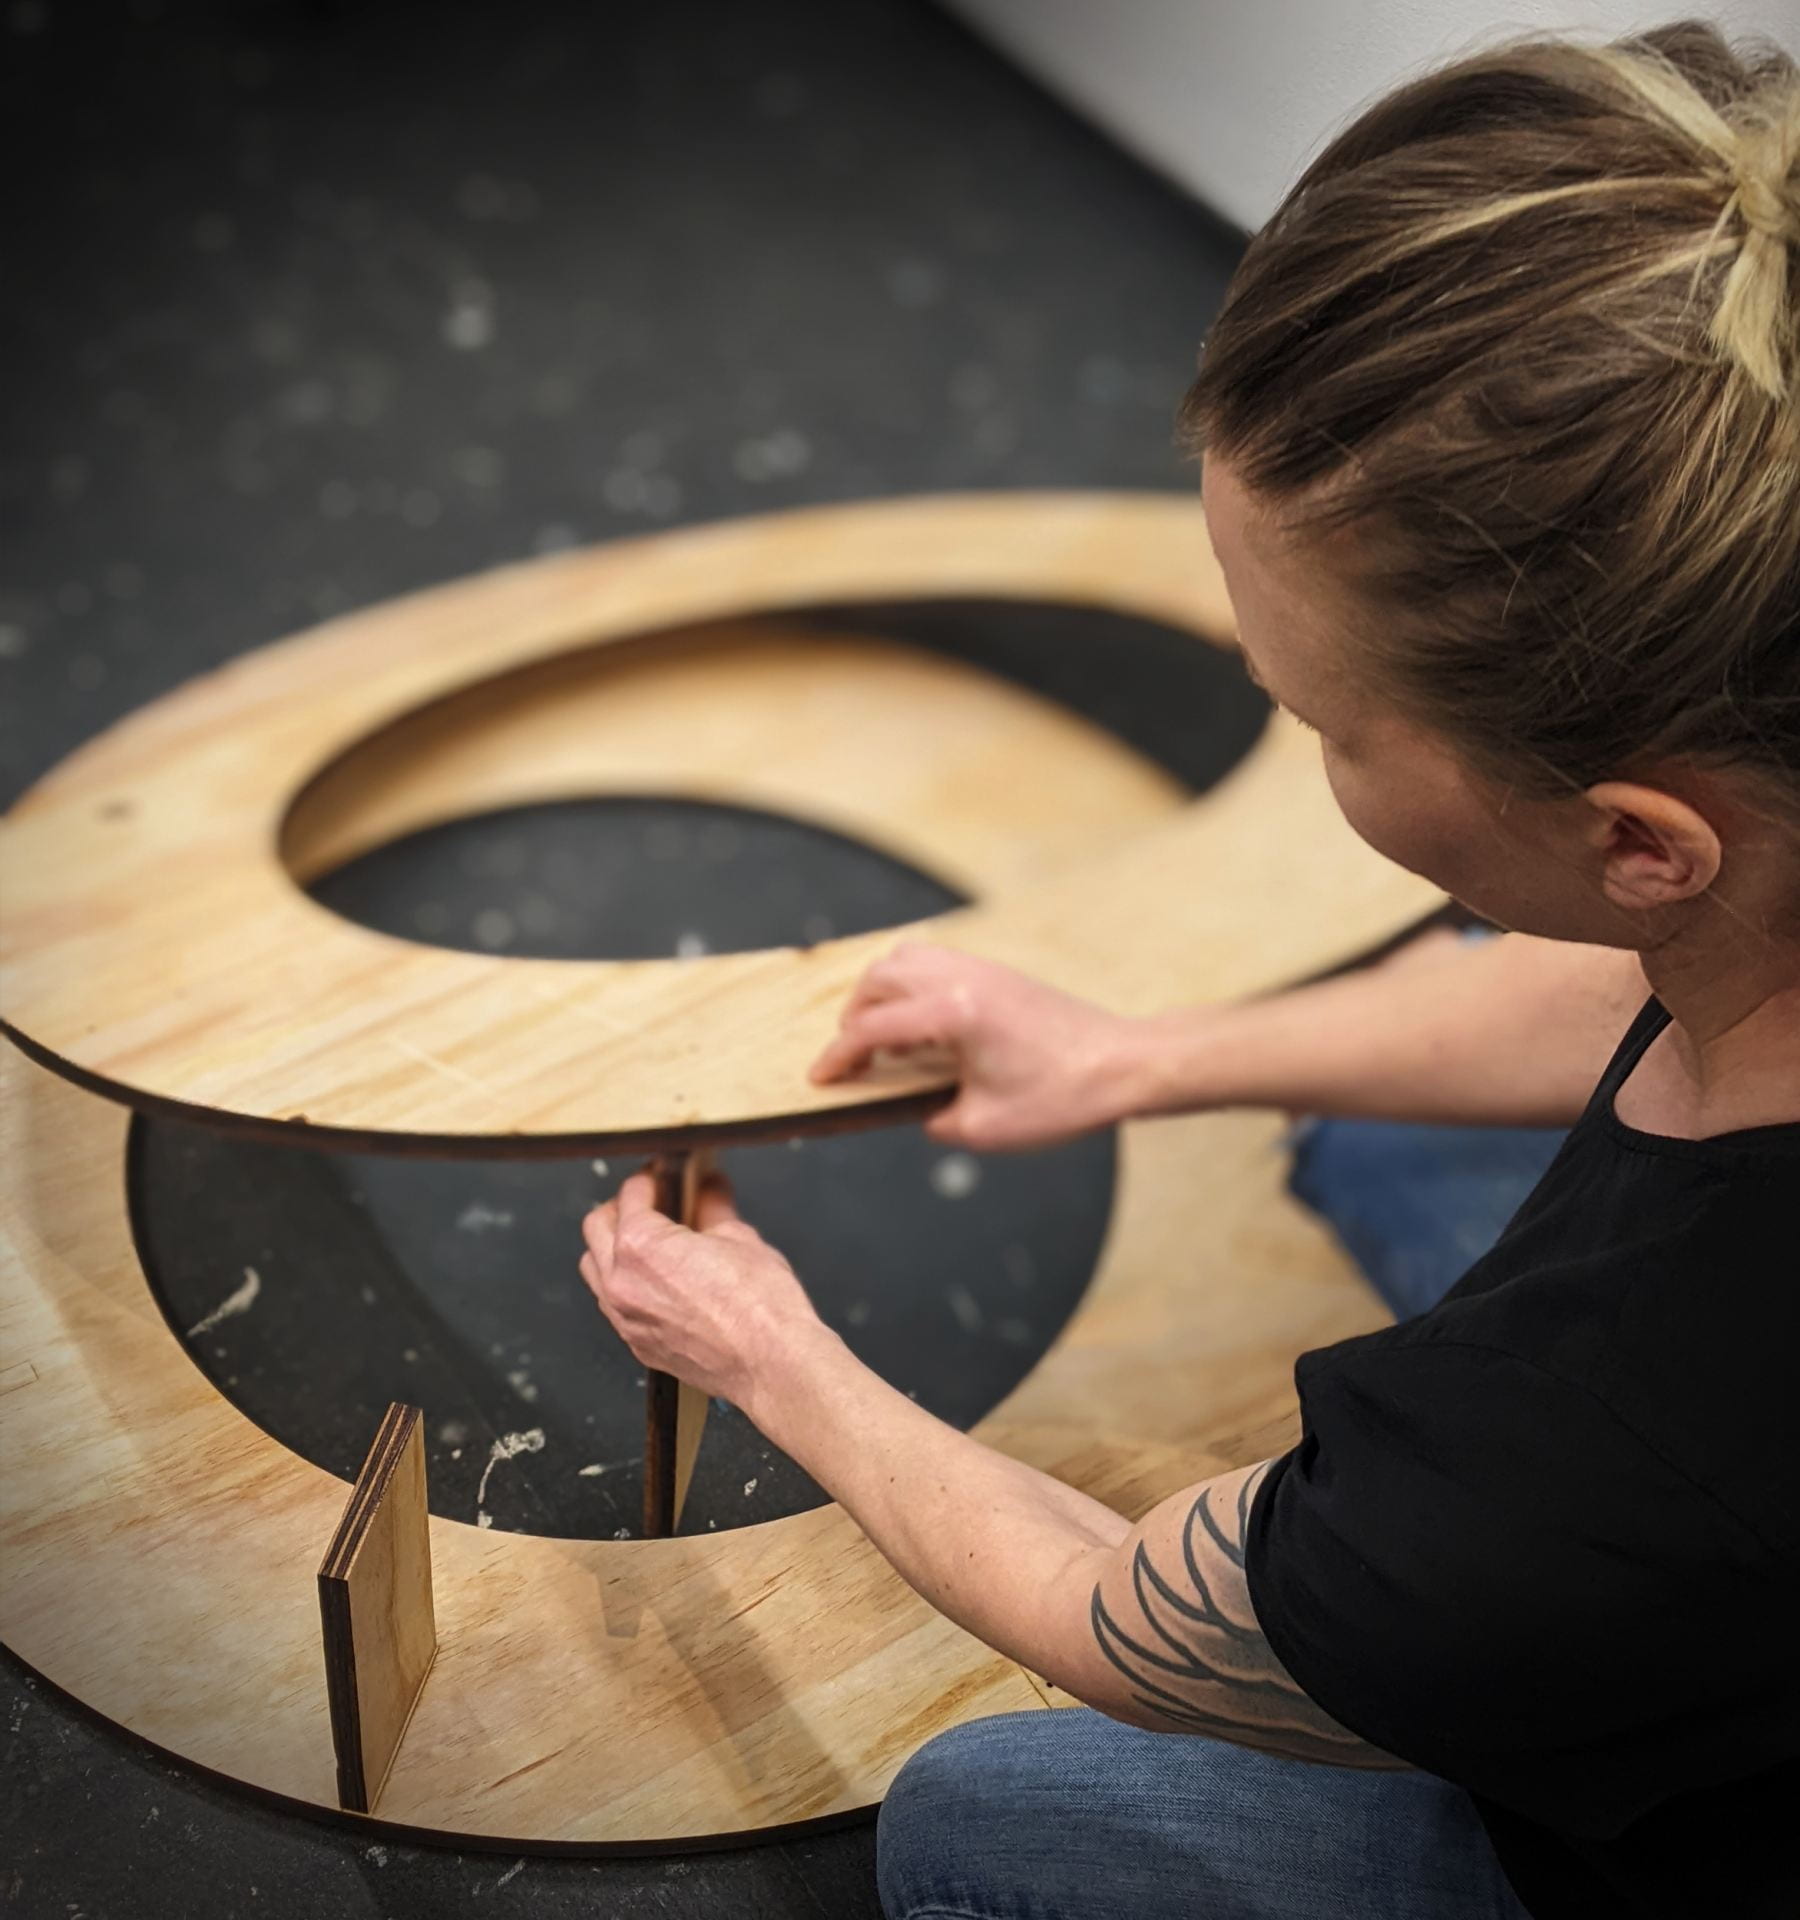 Photo gallery of the artist assembling a wooden structure and holding acrylic disks